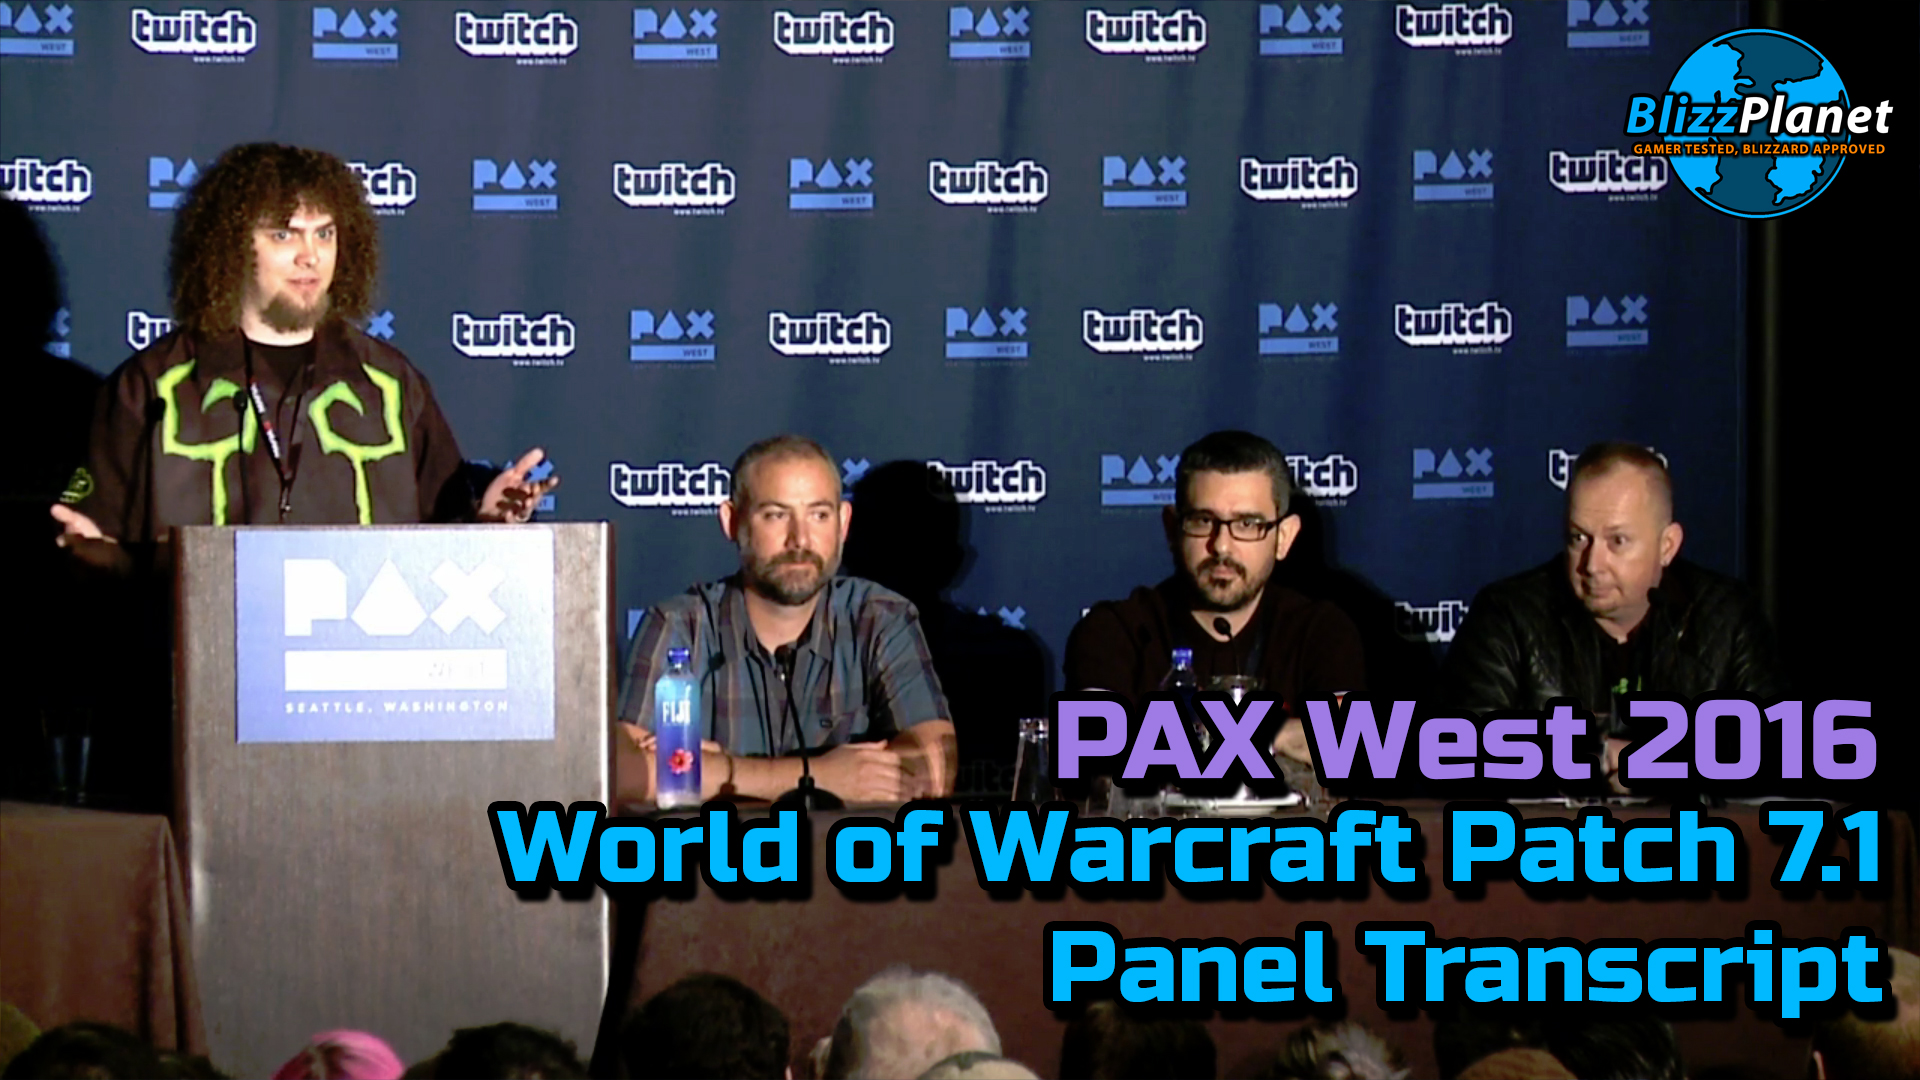 2016-pax-west-world-of-warcraft-the-invasion-continues-panel-transcript